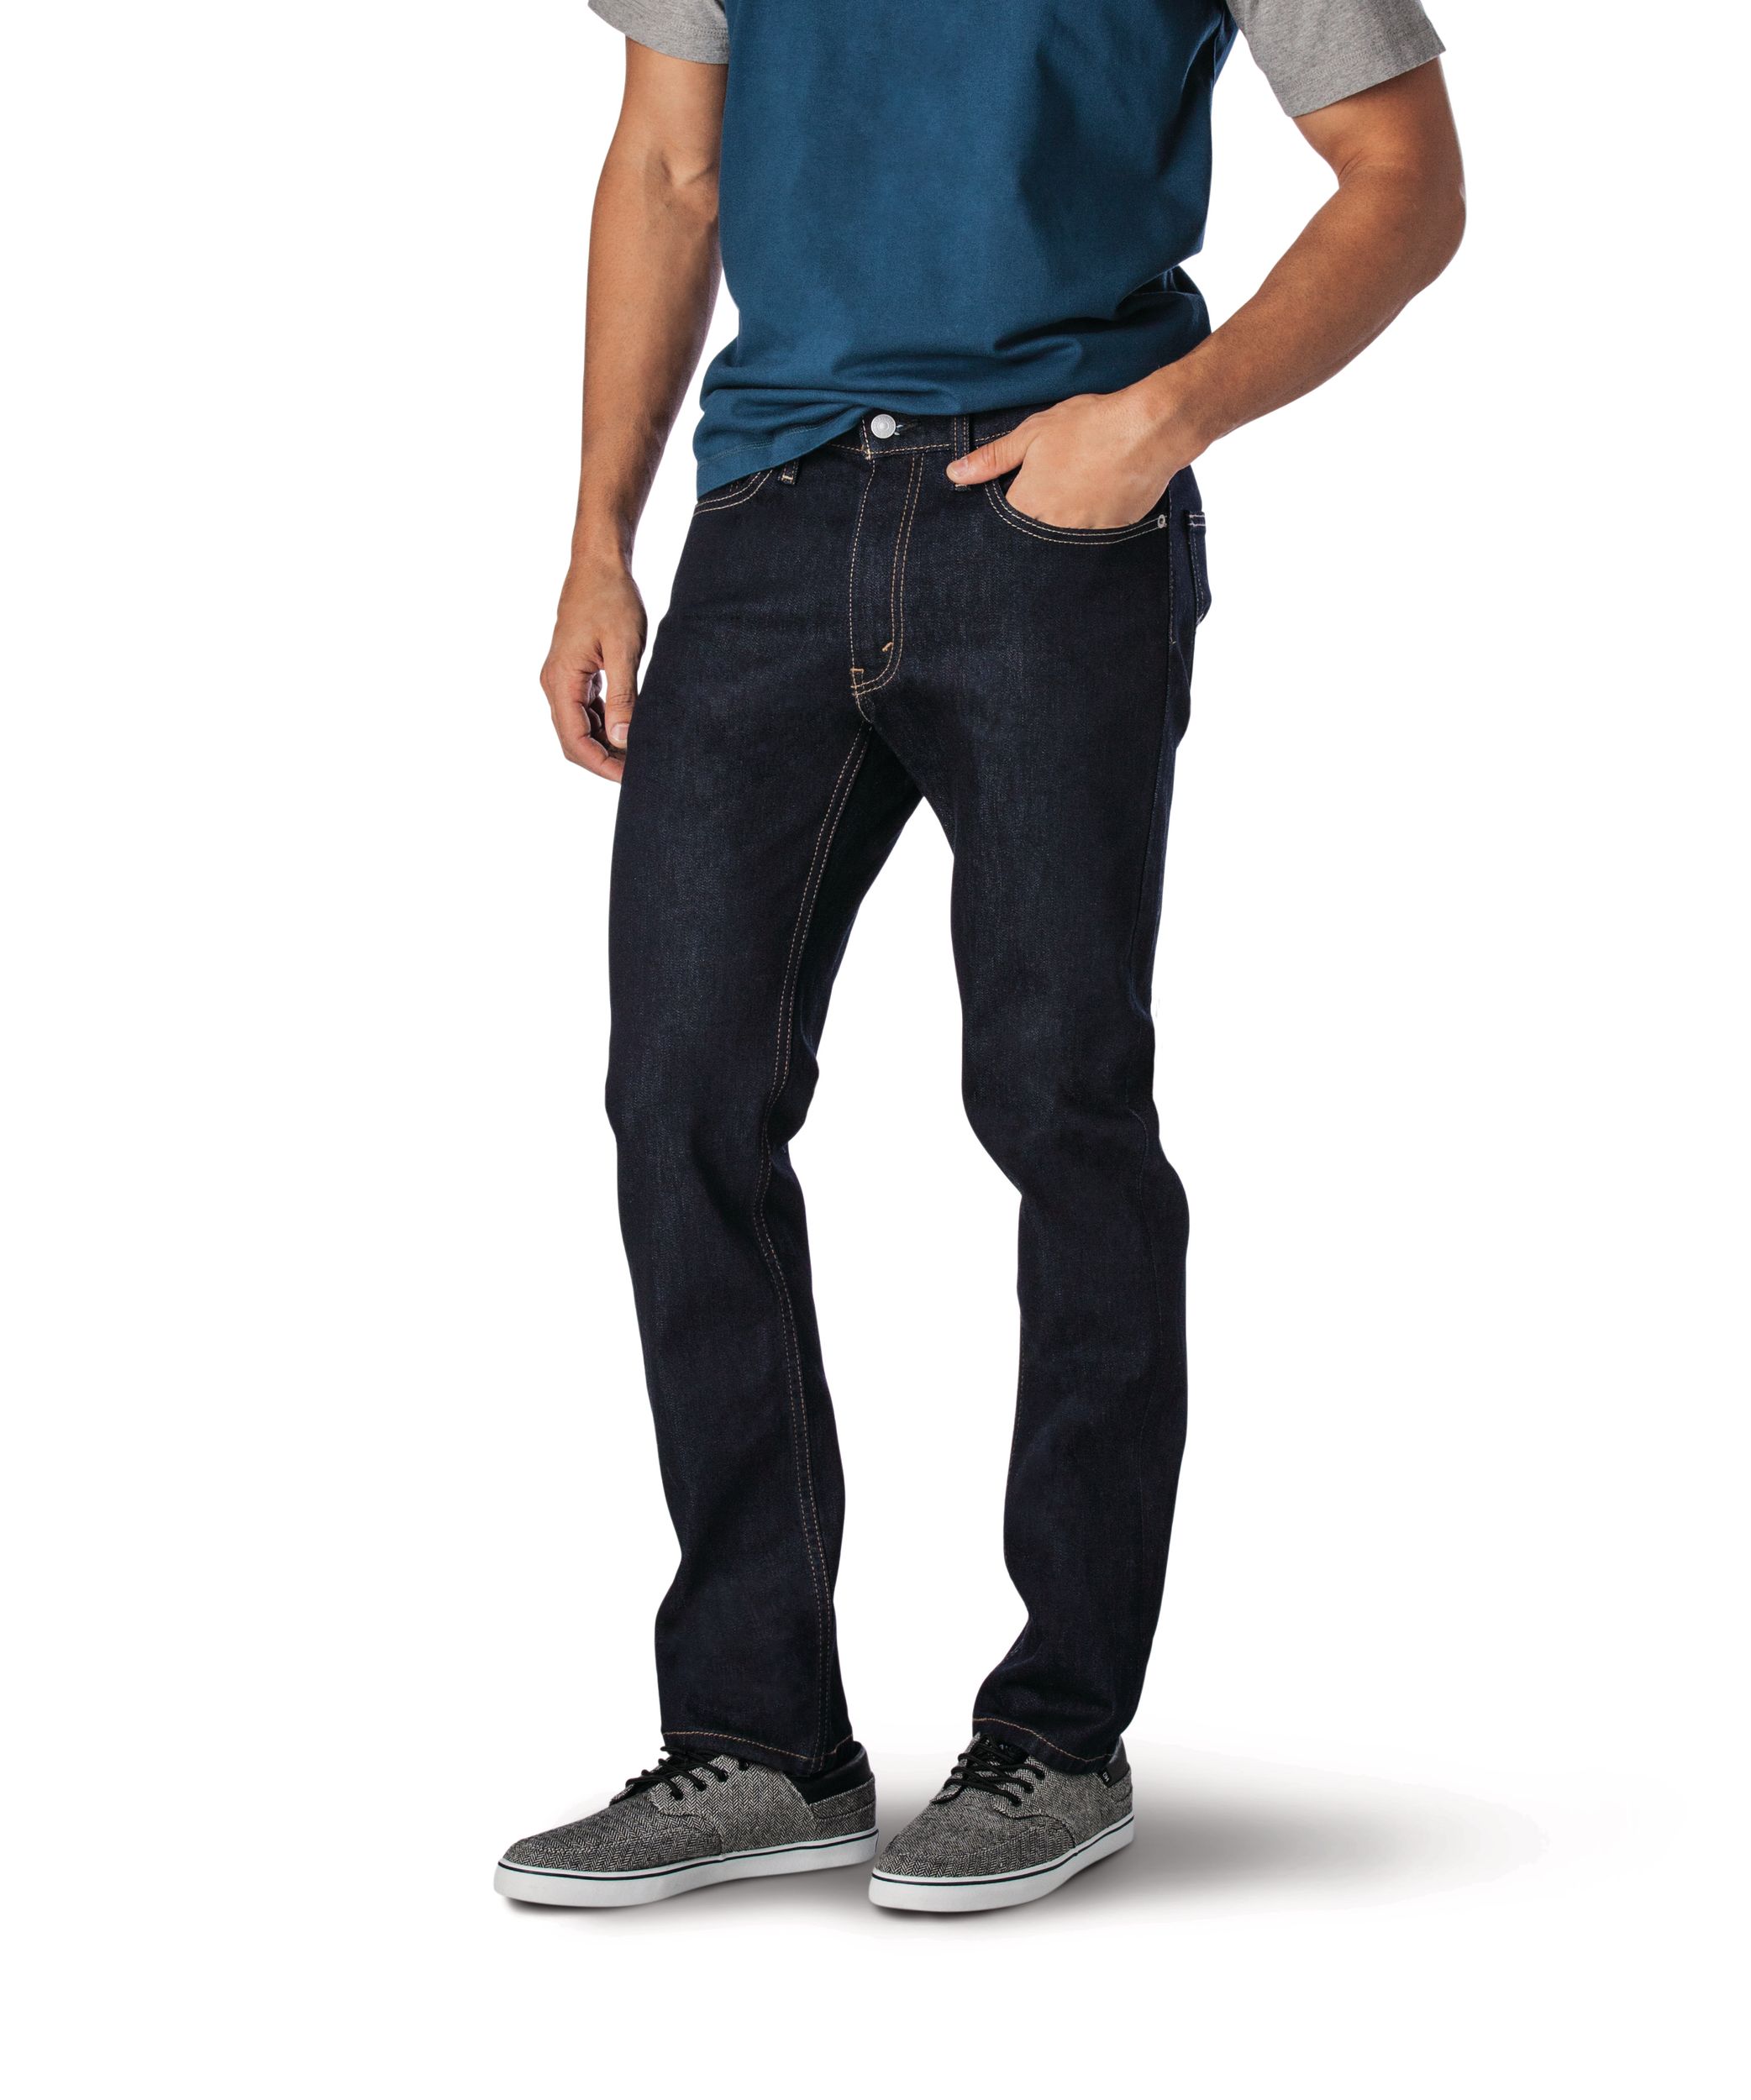 Baggy High Water Jeans - Light Wash | Levi's® US